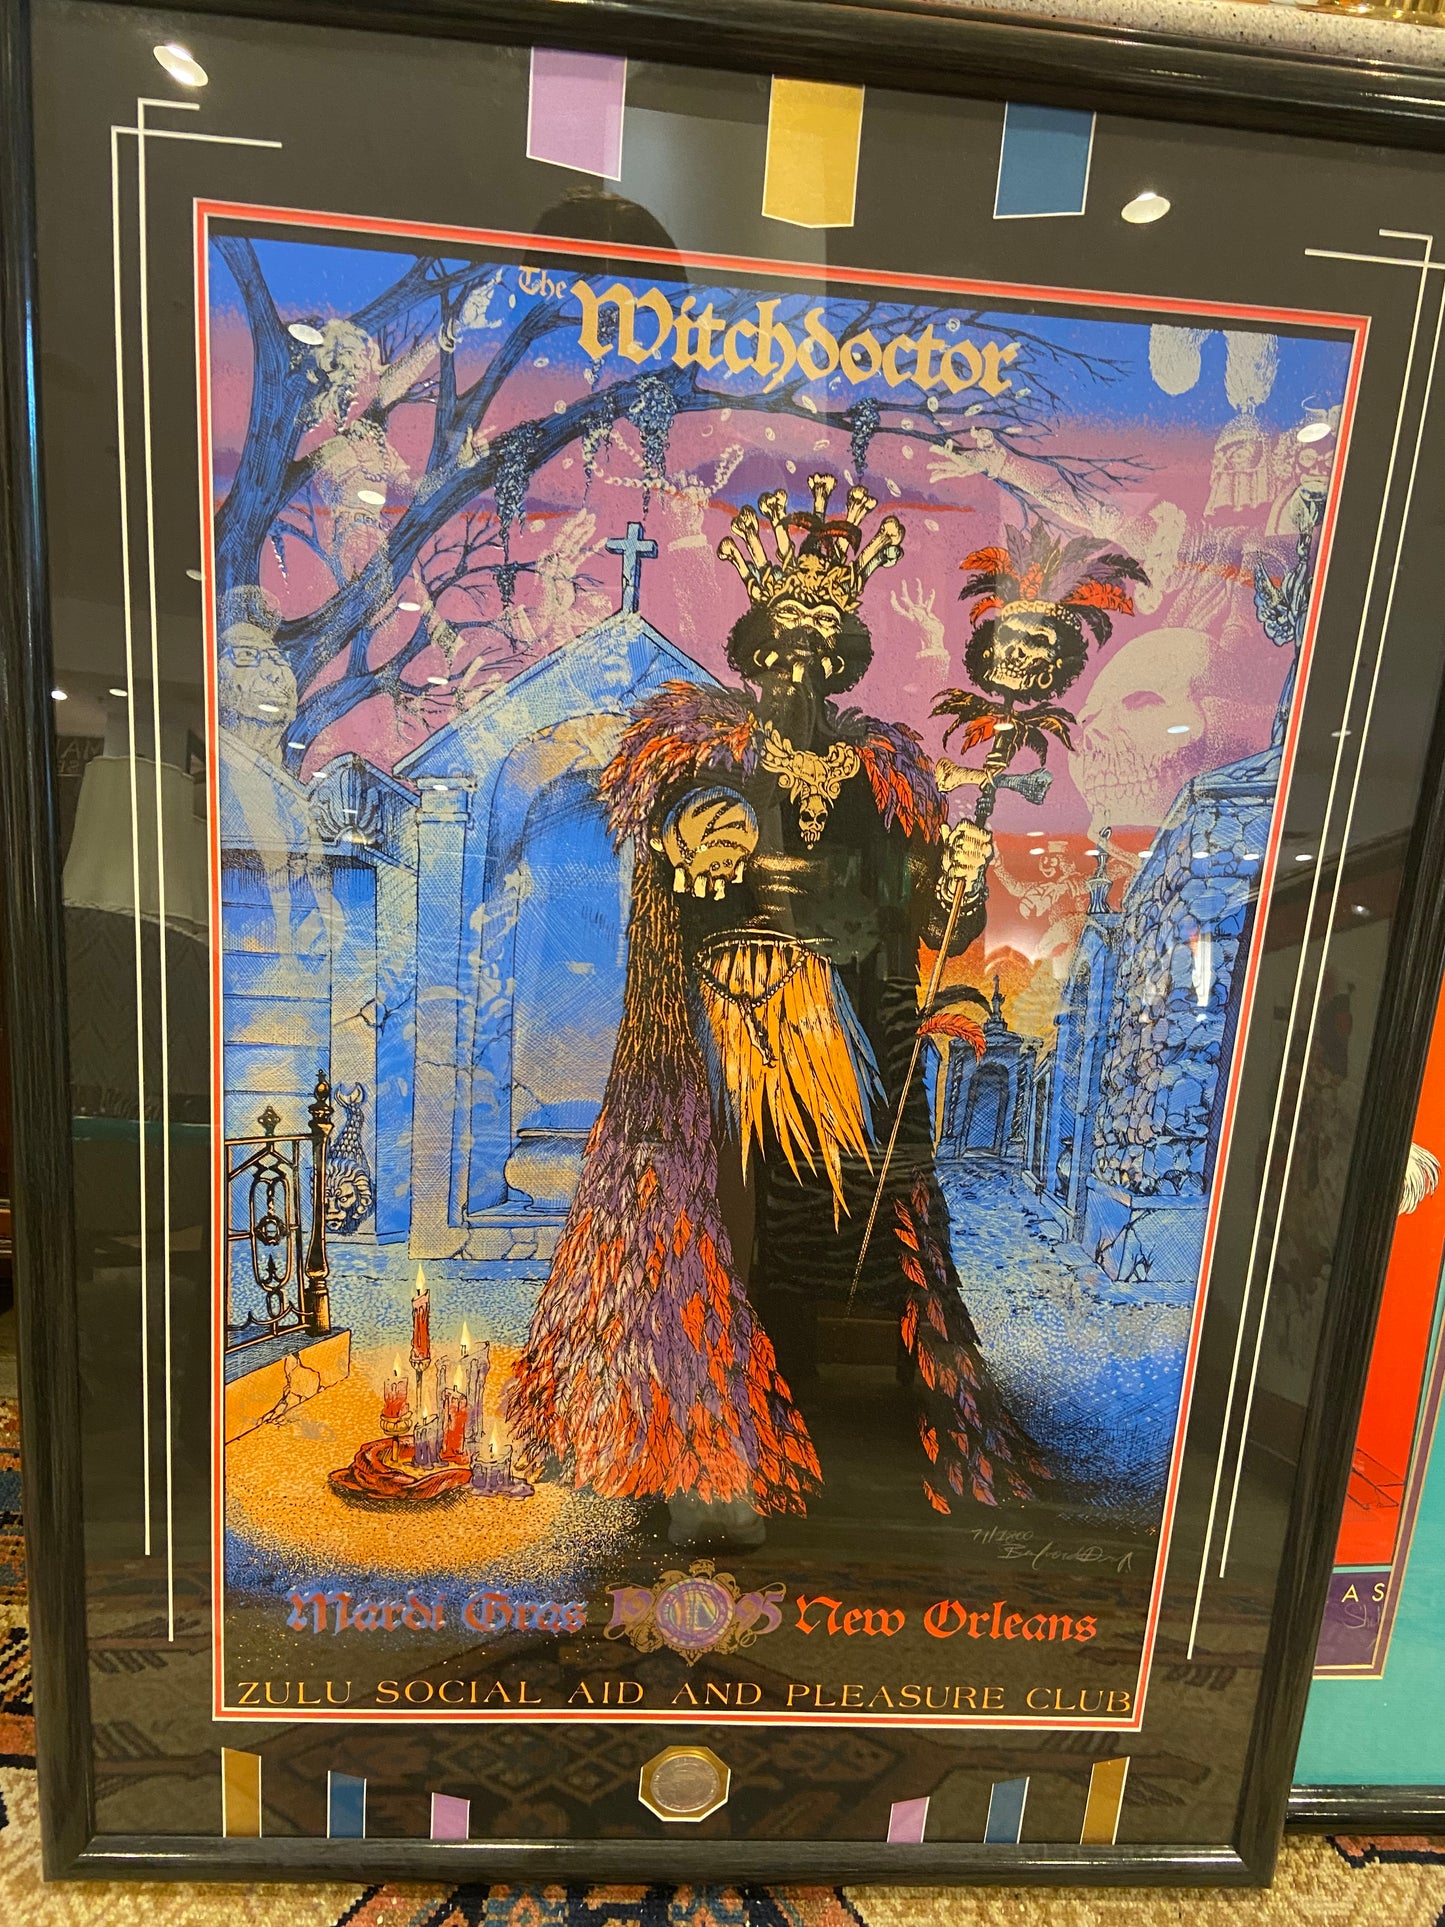 Zulu Social and Pleasure Club Limited Edition Poster "The Witchdoctor" (25030)